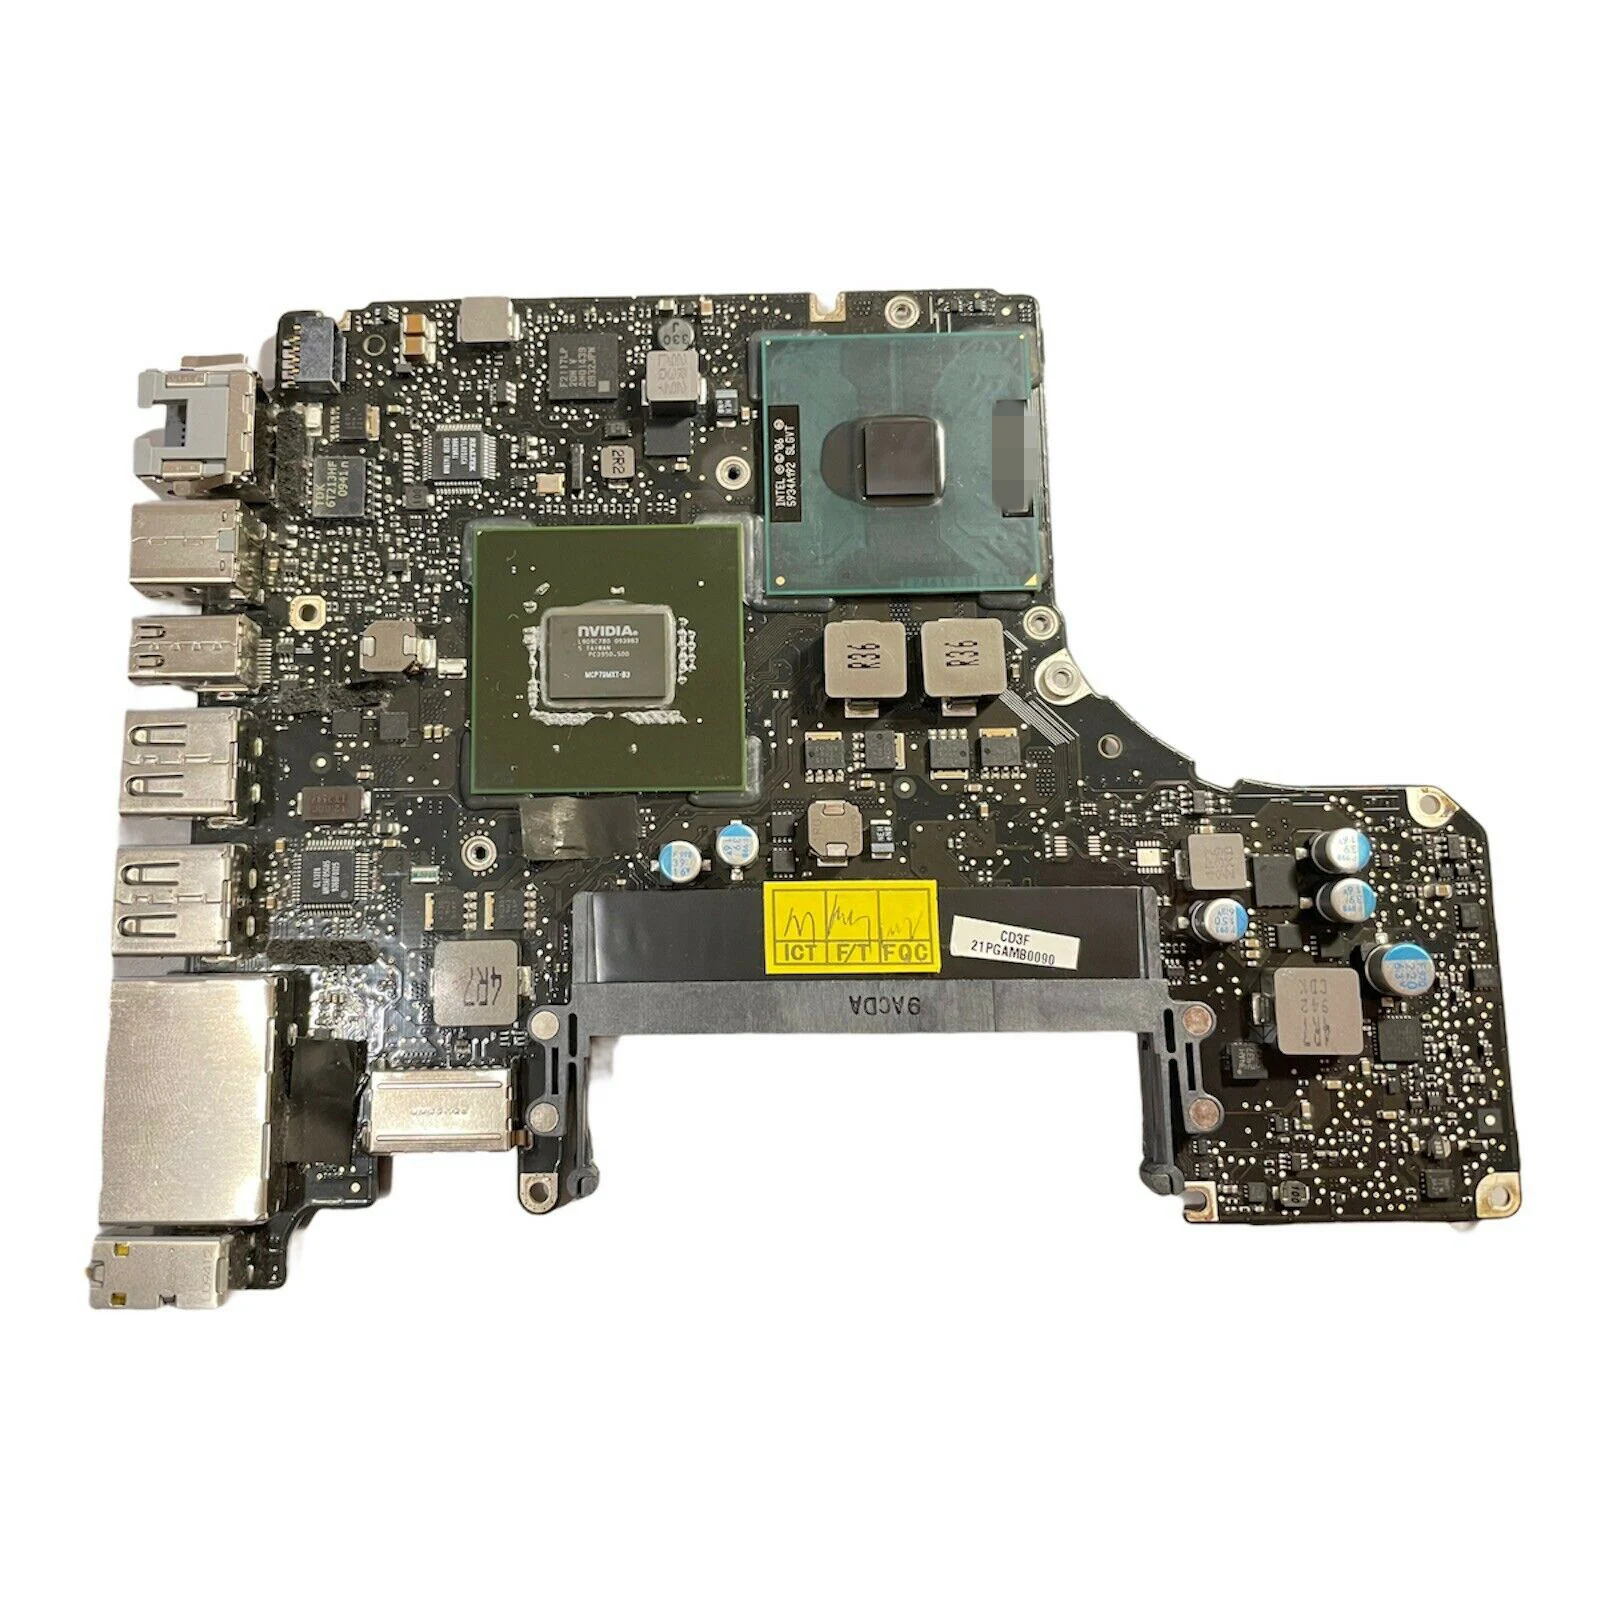 macbook-proのa1278-13-2009-226-24ghz-p7550-mb990ll-253ghz-p8700-mb991ll-aロジックボード661-5230-661-5231-820-2530-a